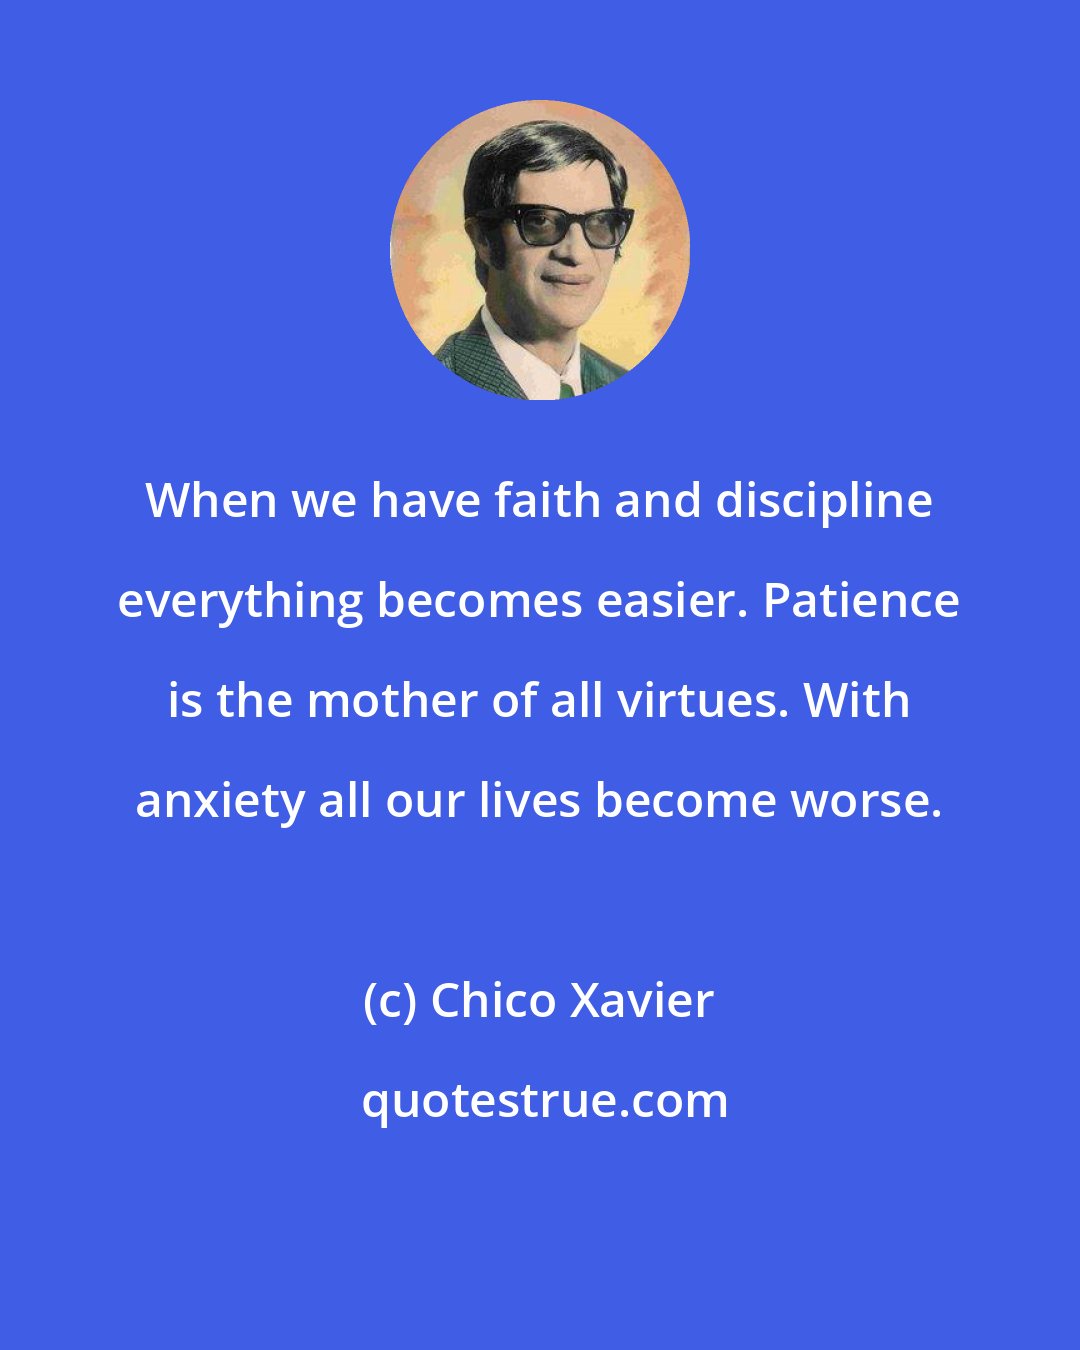 Chico Xavier: When we have faith and discipline everything becomes easier. Patience is the mother of all virtues. With anxiety all our lives become worse.